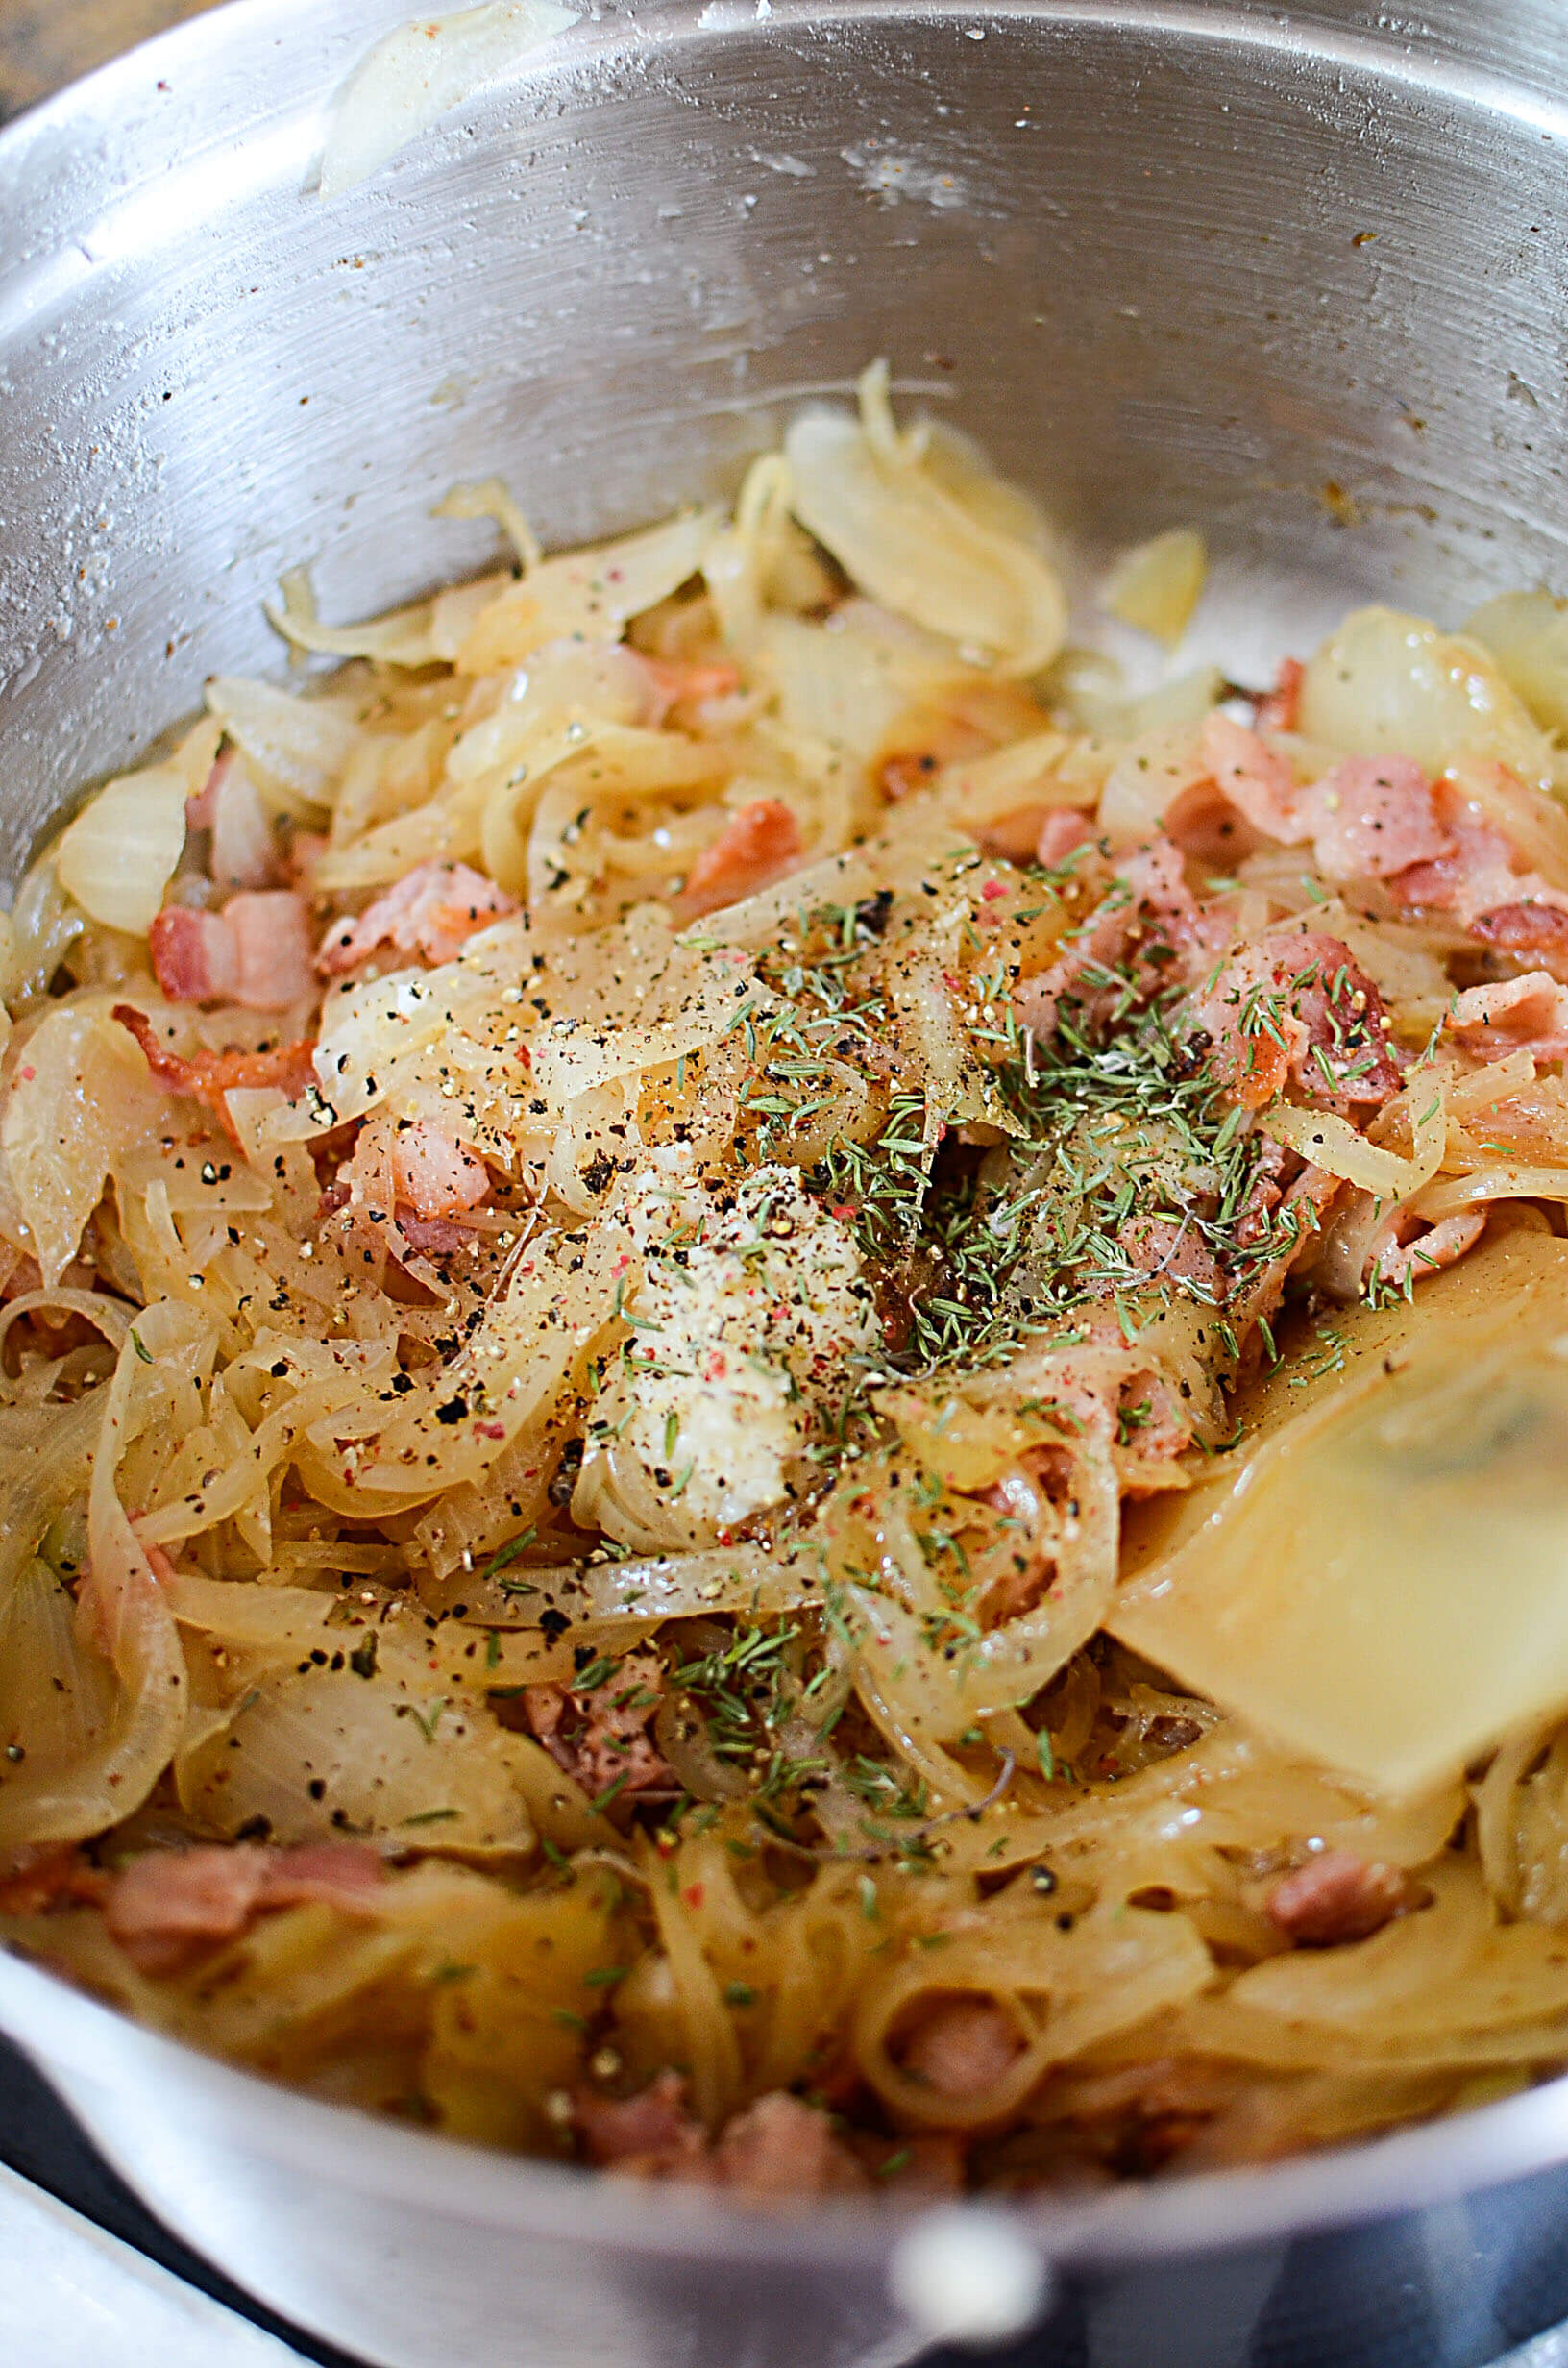 Dried thyme and other spices are added on top of the onions.